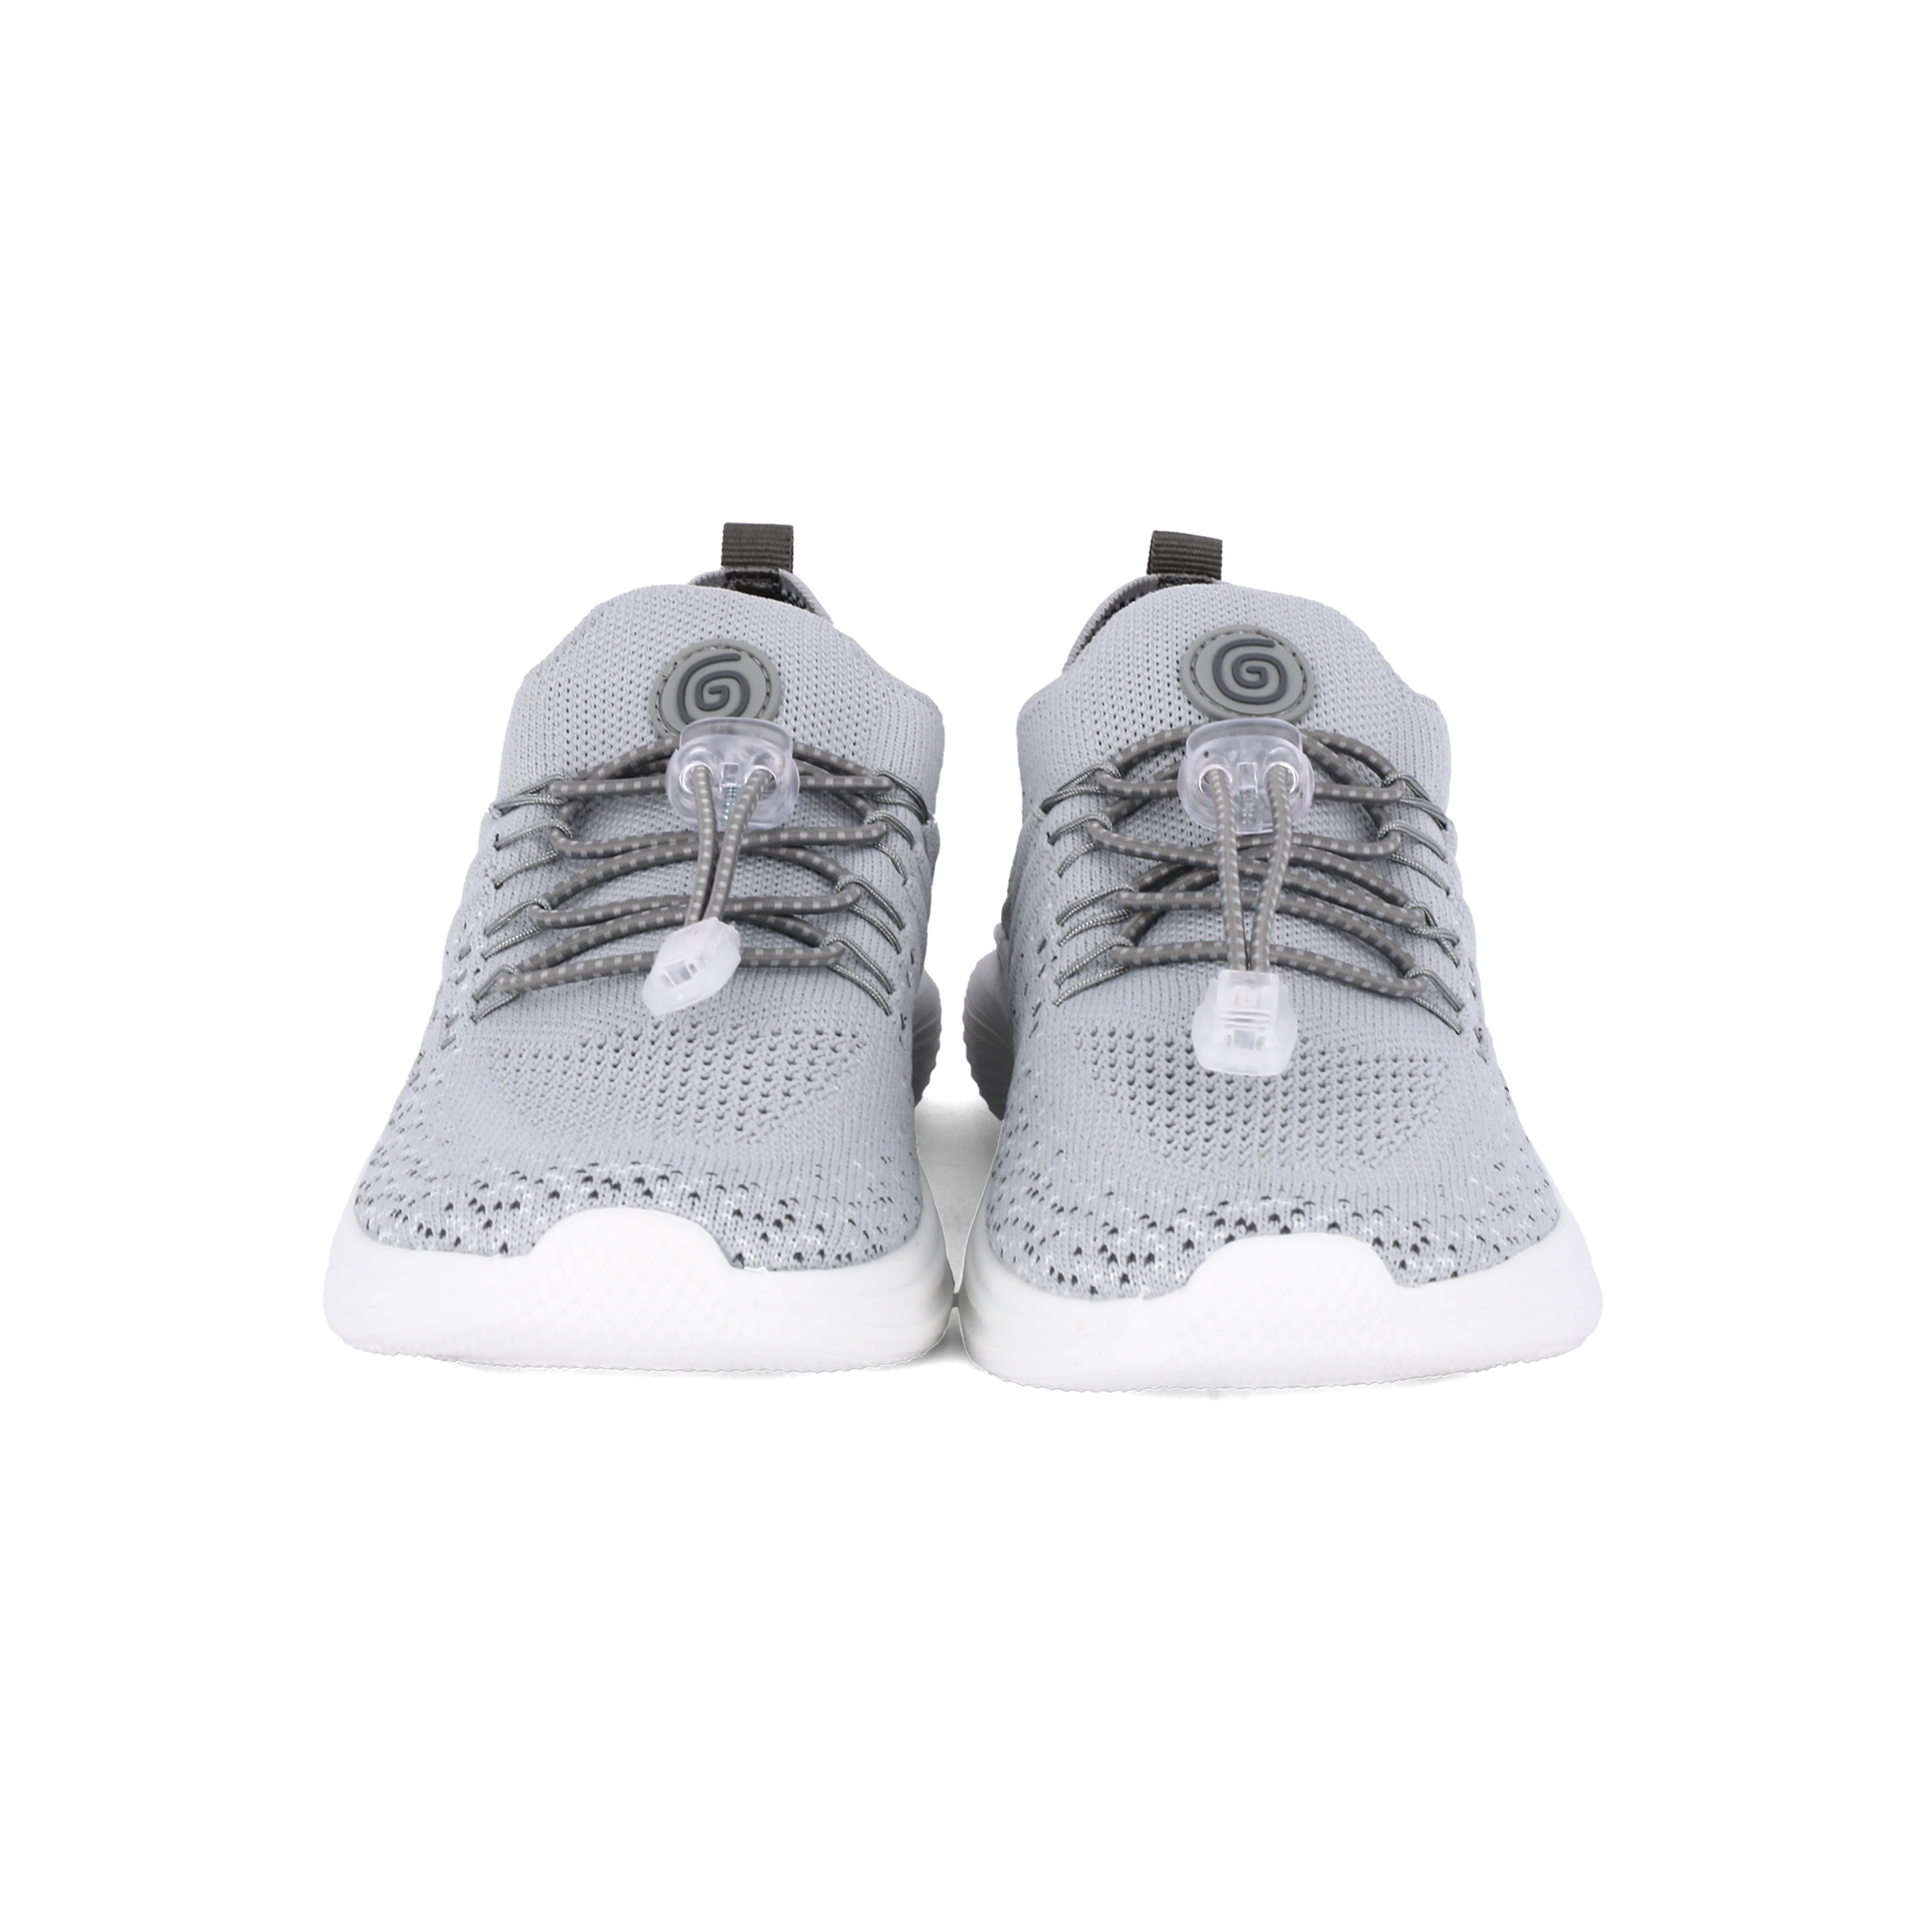 Lightweight recycled sneakers with gray laces